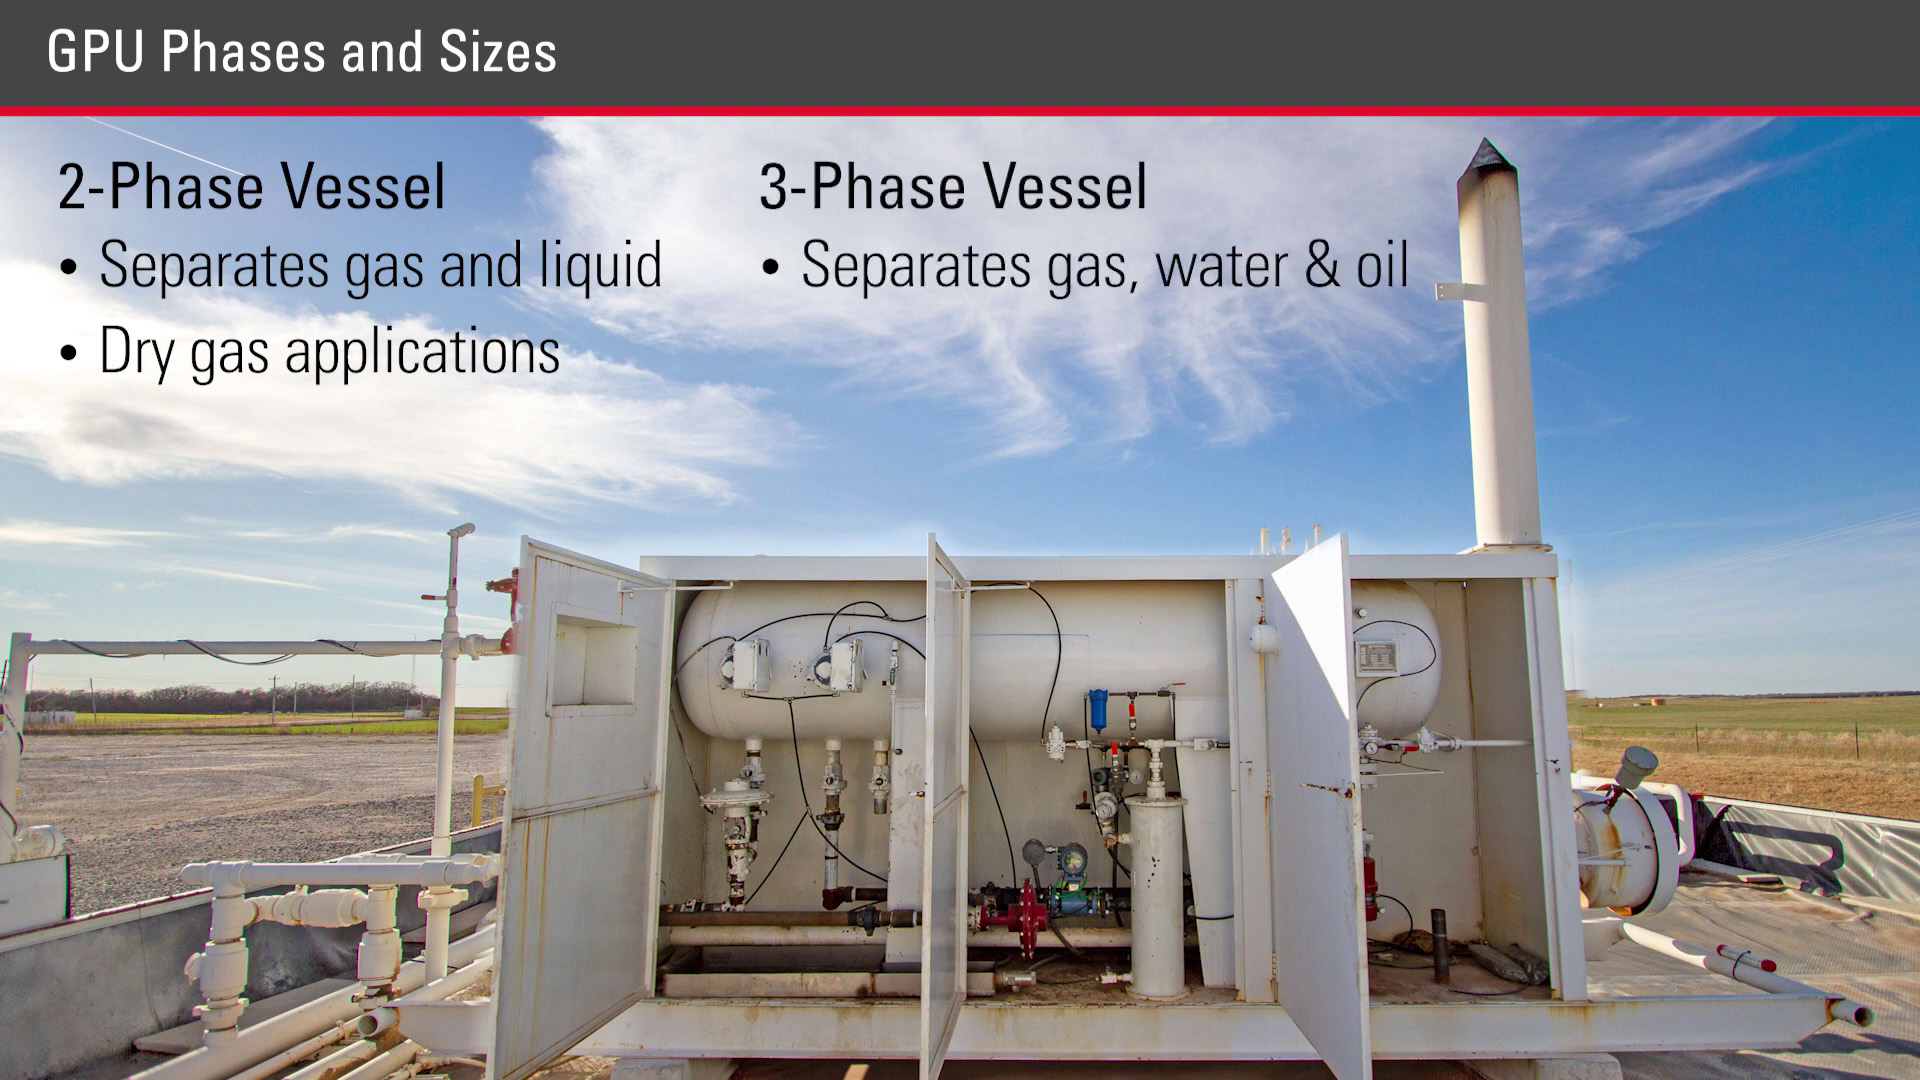 Gas Production Unit Options with 2-Phase and 3-Phase Vessels